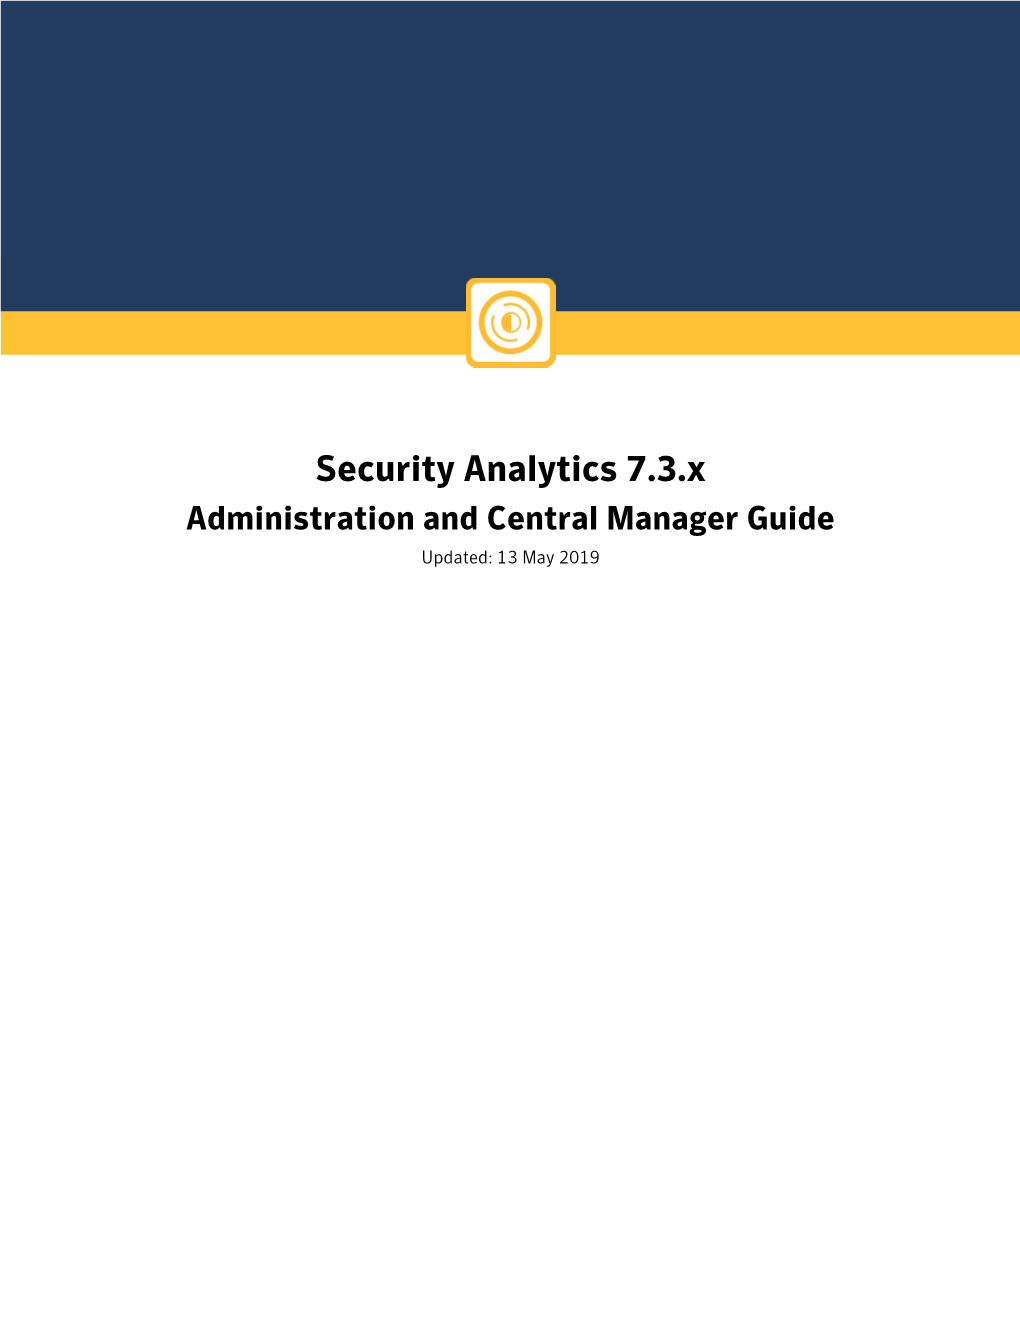 Security Analytics 7.3.X Administration and Central Manager Guide Updated: 13 May 2019